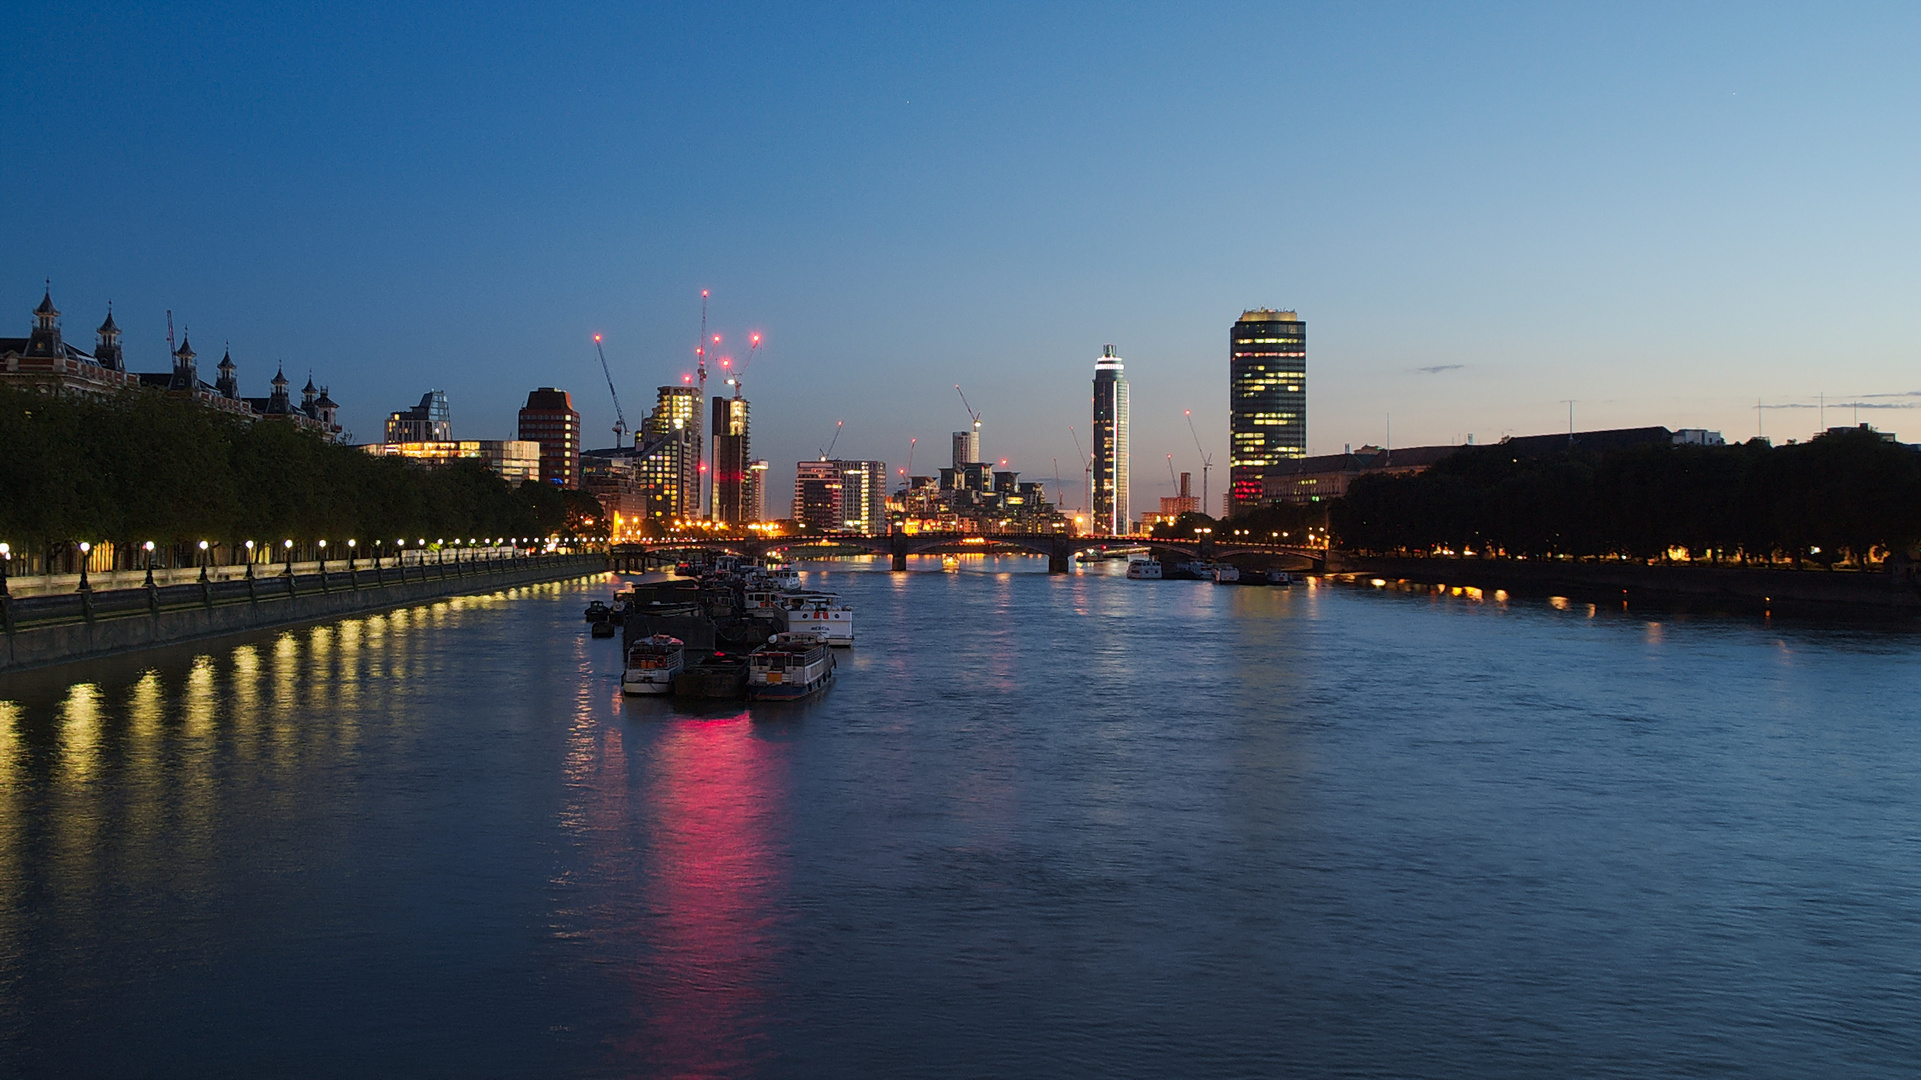 London - the Themse in the evening